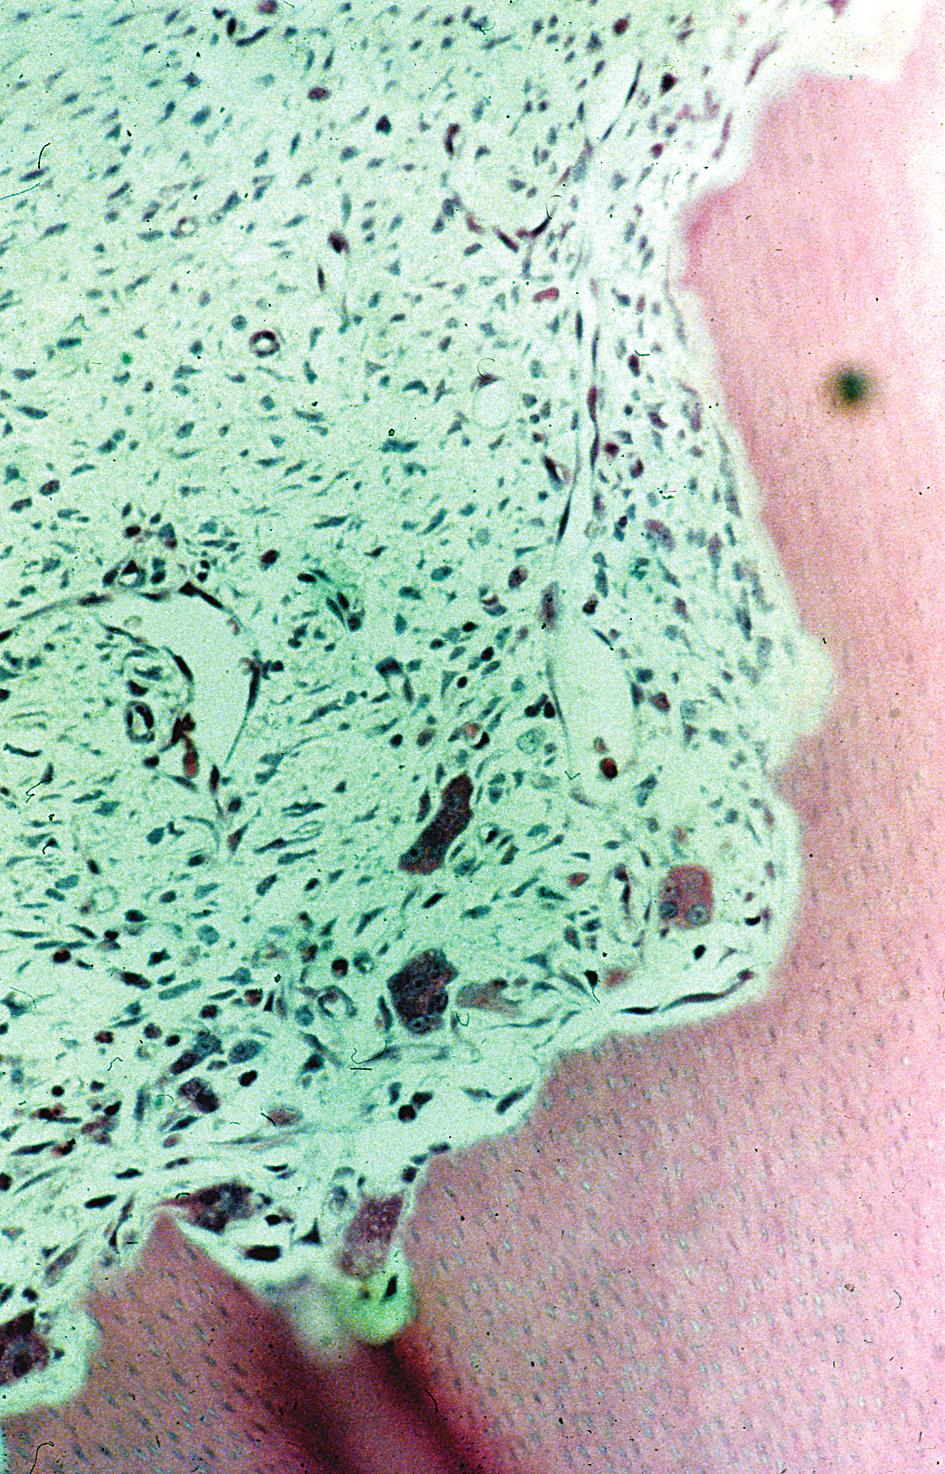 B: The root surface is re sorbed by multinuclear clast-like cells along an irregular dentin surface (LM).